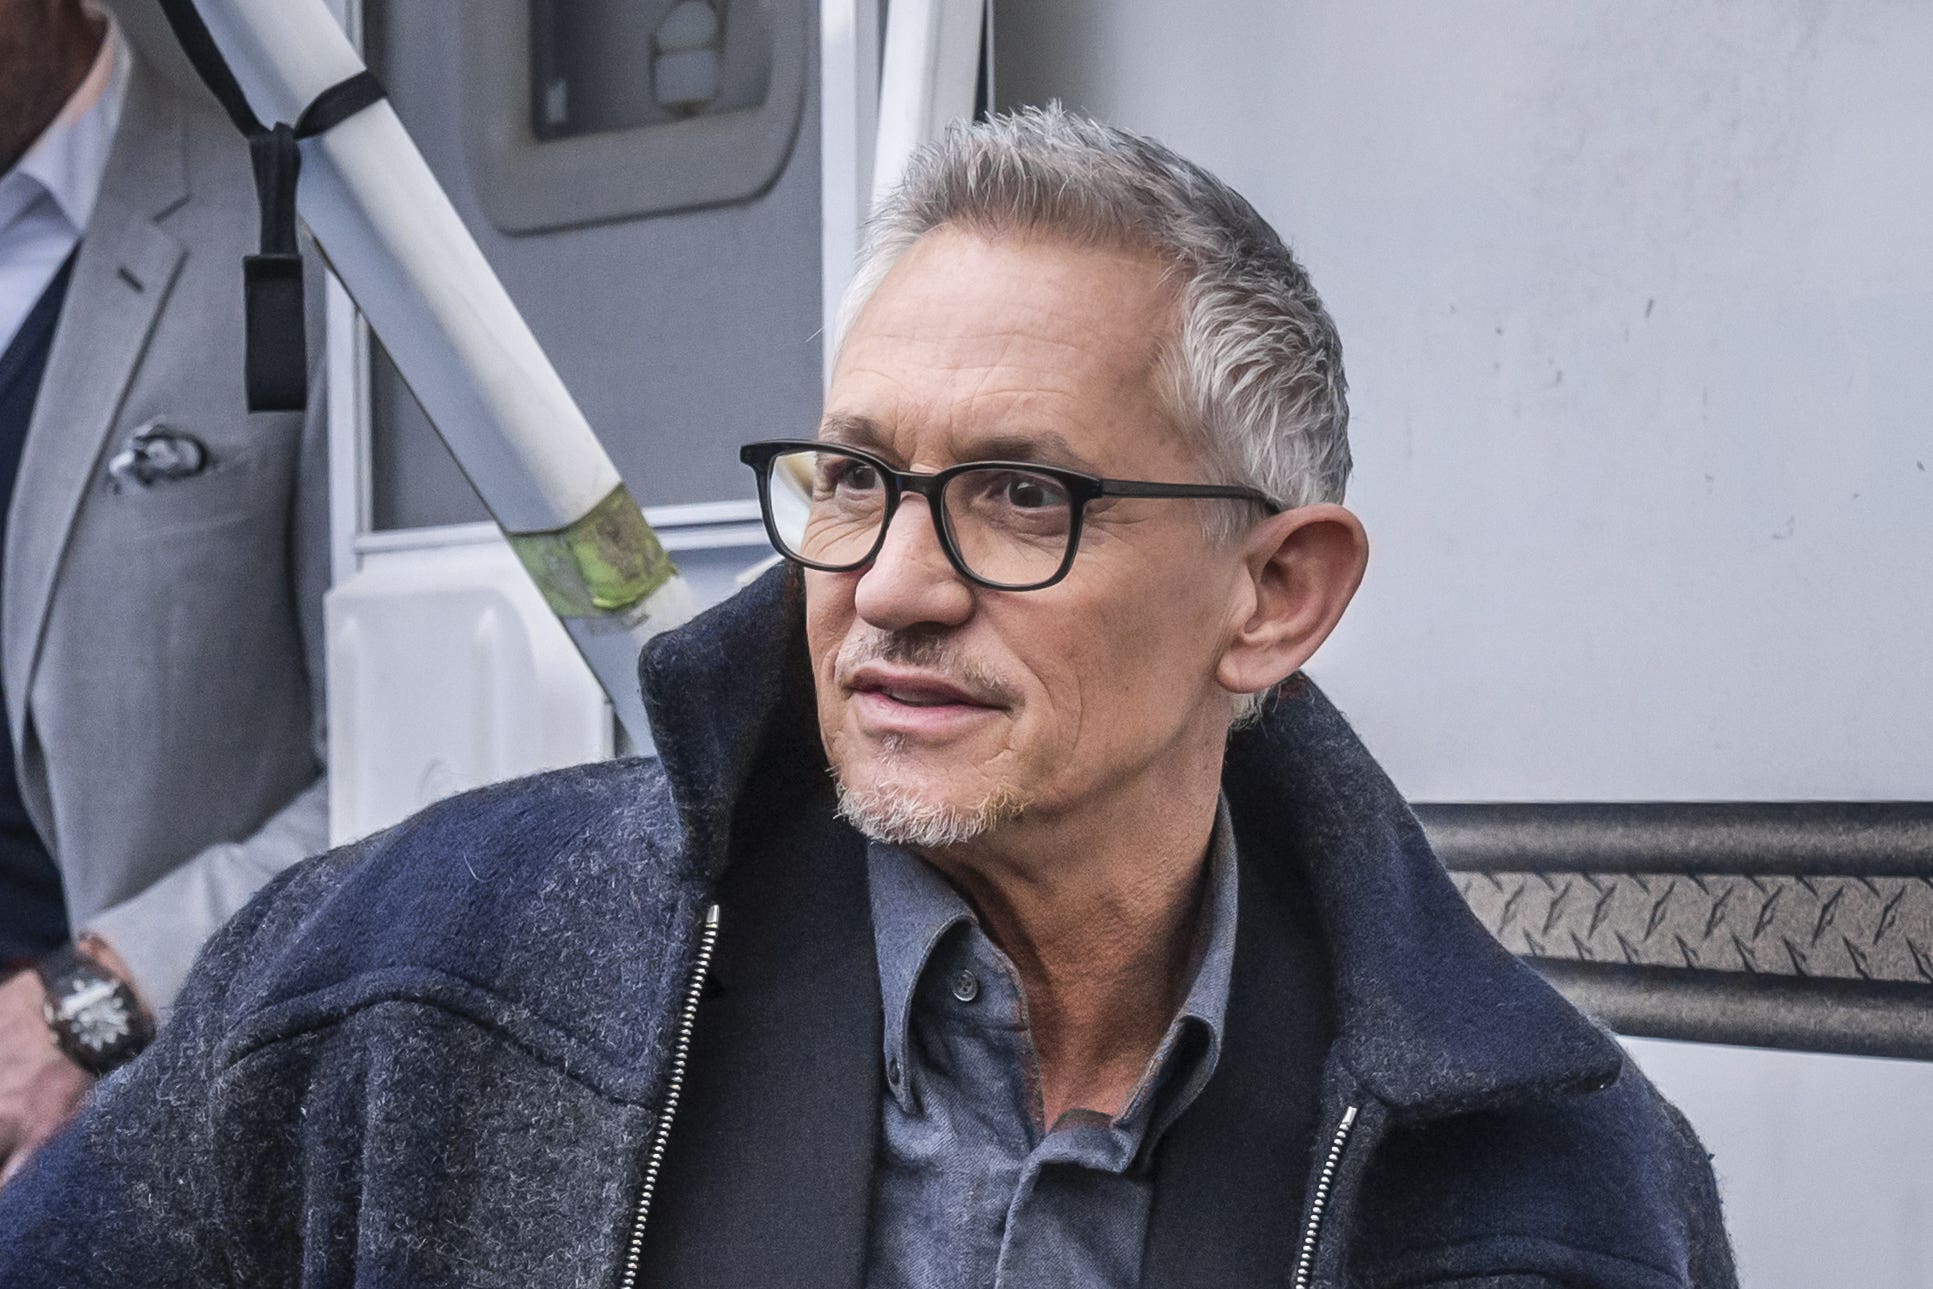 Gary Lineker has spoken about the row about his tweets